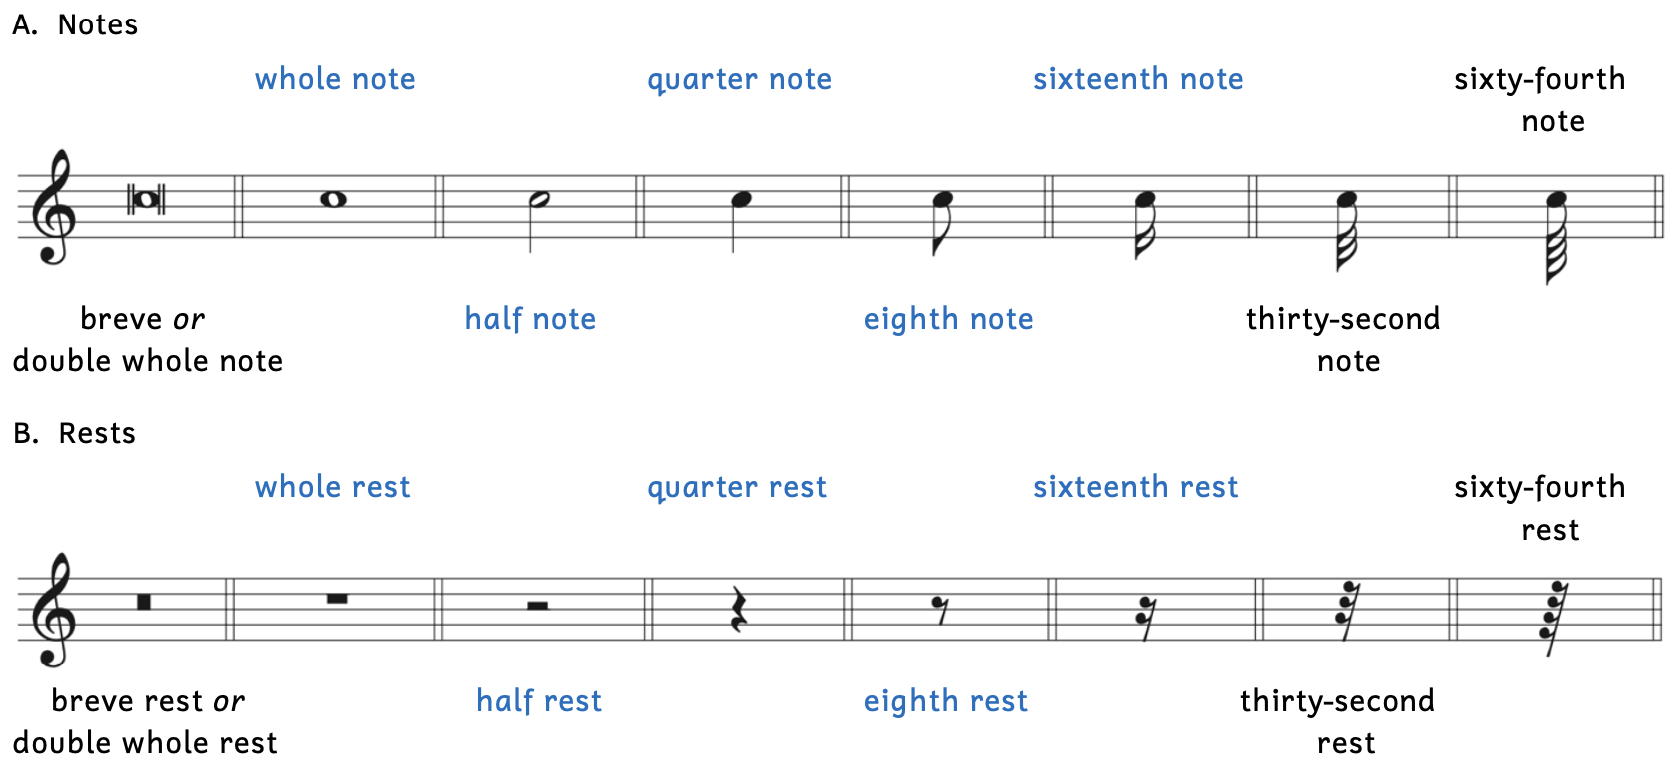 Various note and rest values are shown. Example A shows different types of notes including the breve or double whole note, the whole note, the half note, the quarter note, the eighth note, the sixteenth note, the thirty-second note, and the sixty-fourth note. Example B shows different types of rests include the breve rest or double whole rest, the whole rest, the half rest, the quarter rest, the eighth rest, the sixteenth rest, the thirty-second rest, and the sixty-fourth rest. The most common notes and rests are shown in blue, which include the whole note and rest, the half note and rest, the quarter note and rest, the eighth note and rest, and the sixteenth note and rest.